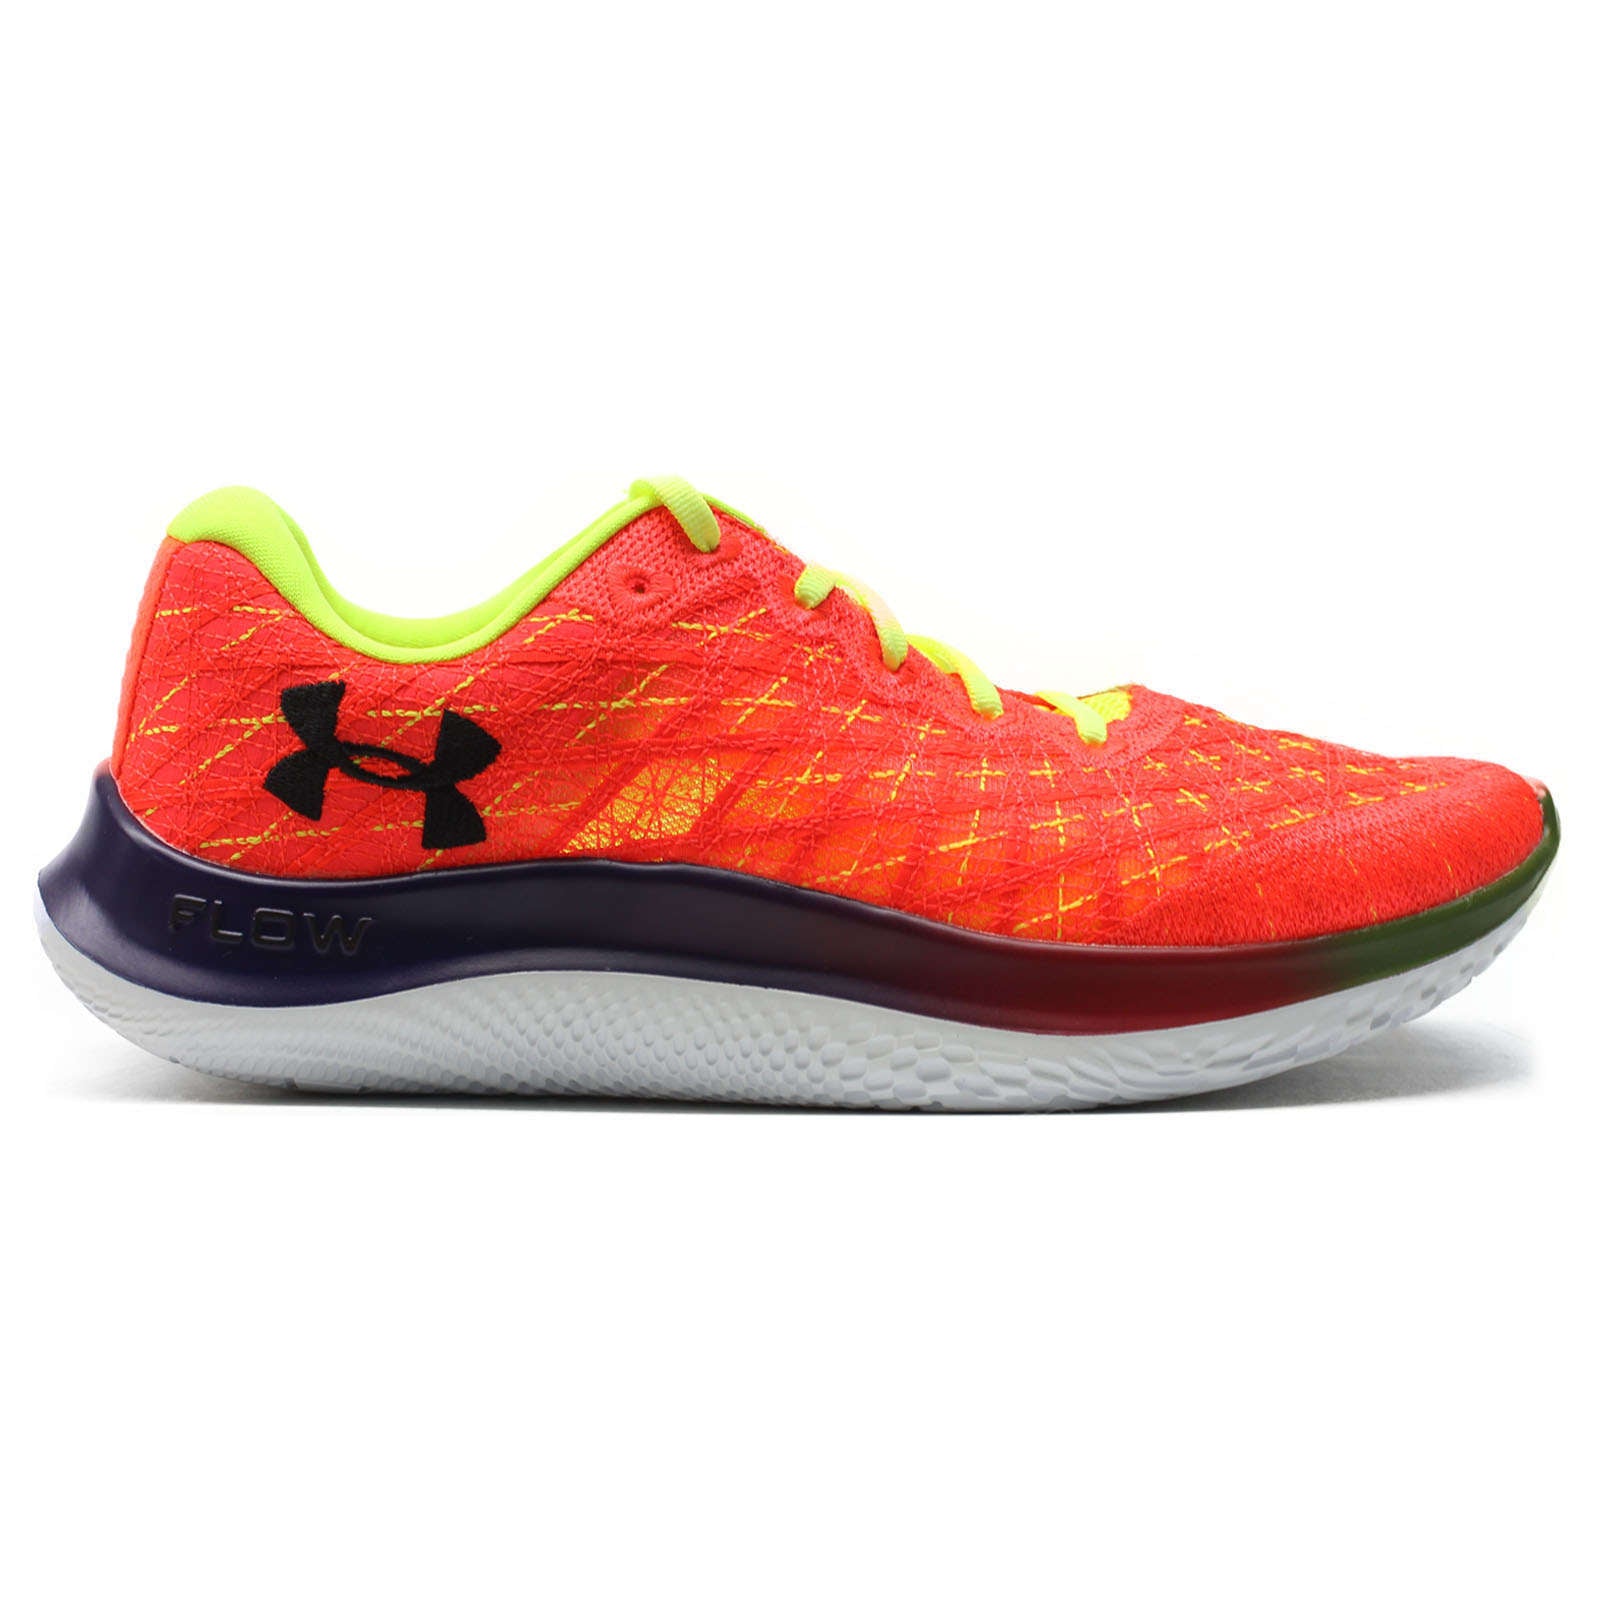 Under Armour Flow Velociti Wind Rn Synthetic Textile Unisex Low-Top Trainers#color_orange yellow